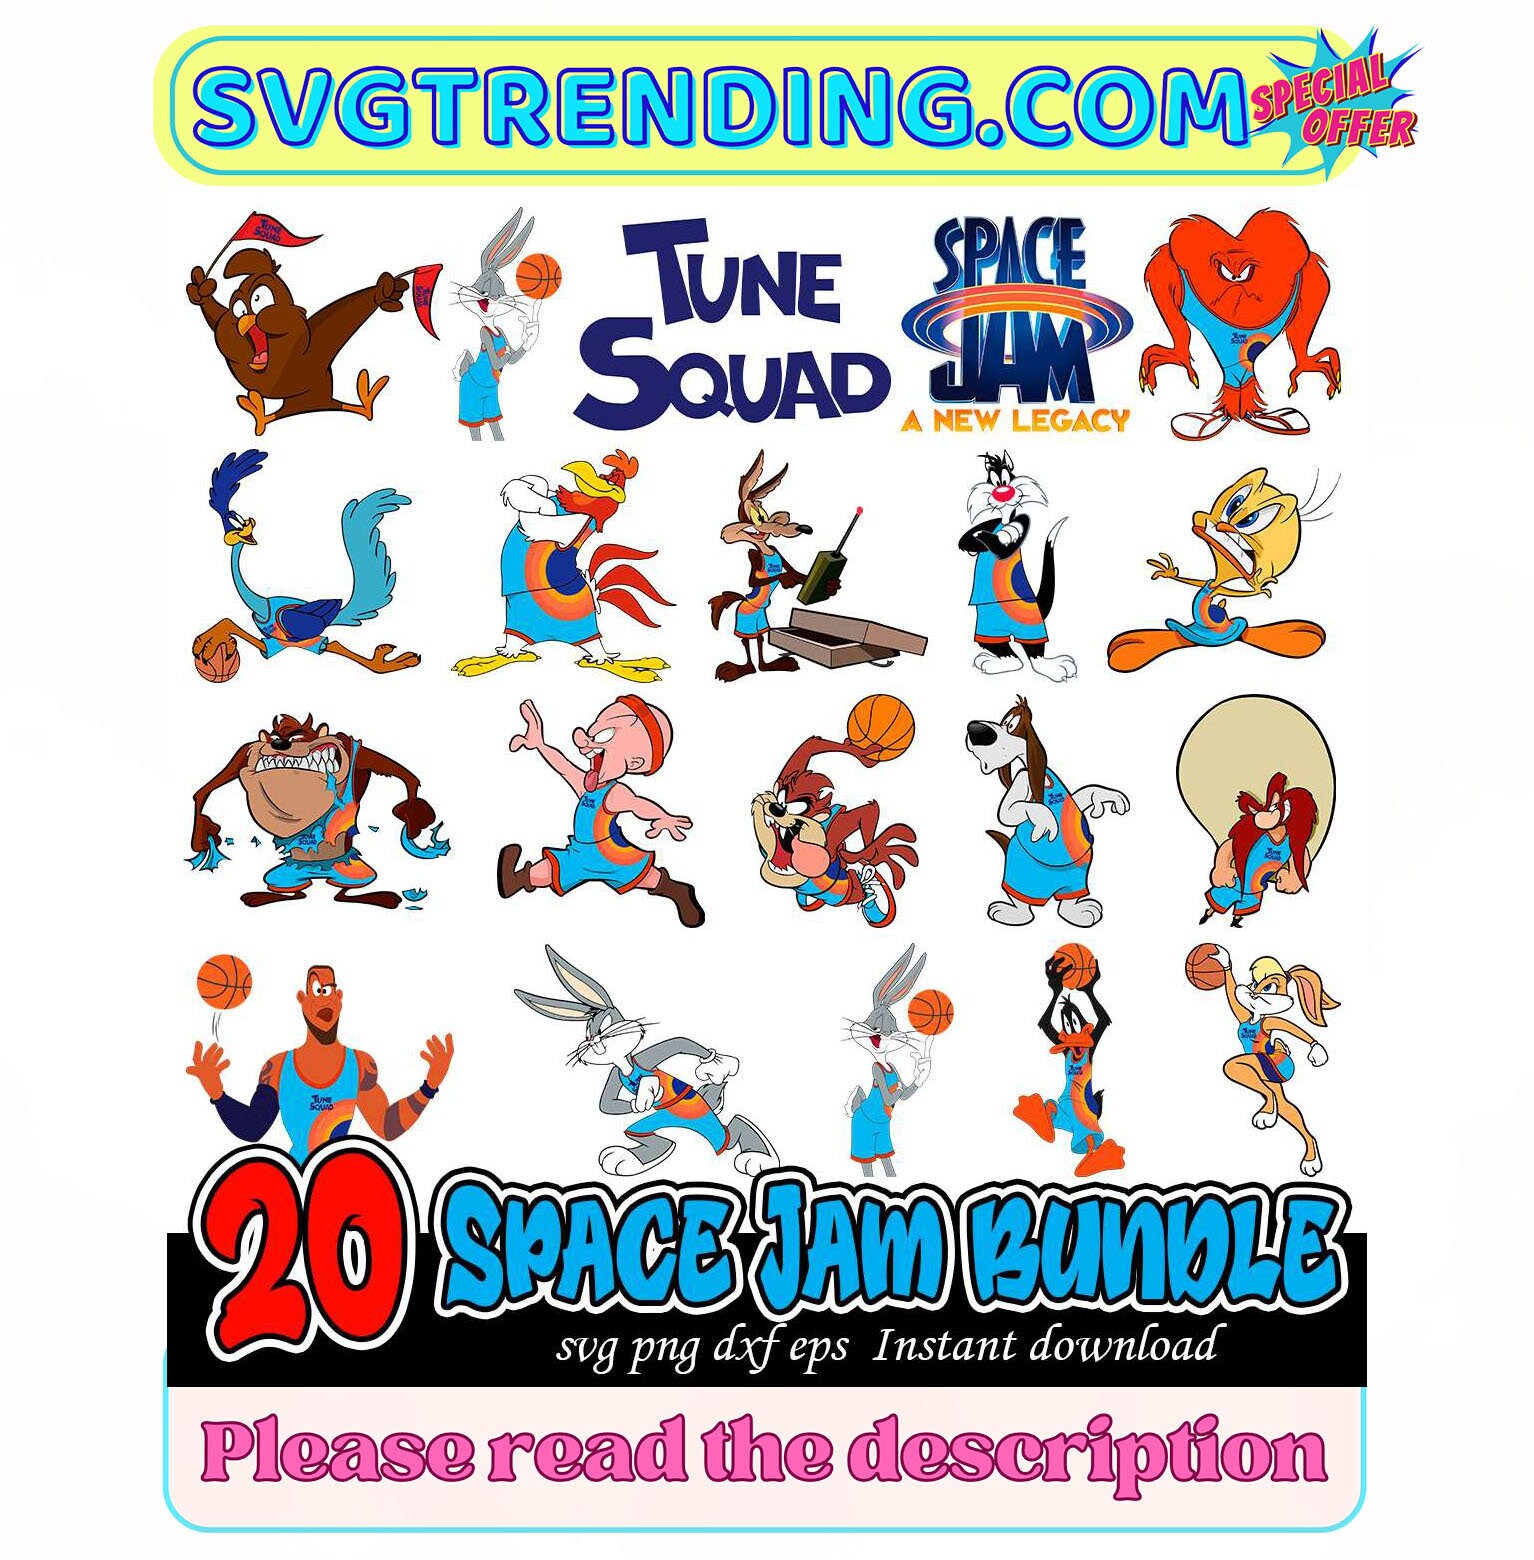 Space Jam Monstars Collage  Space jam, Classic cartoon characters, Happy  20th anniversary